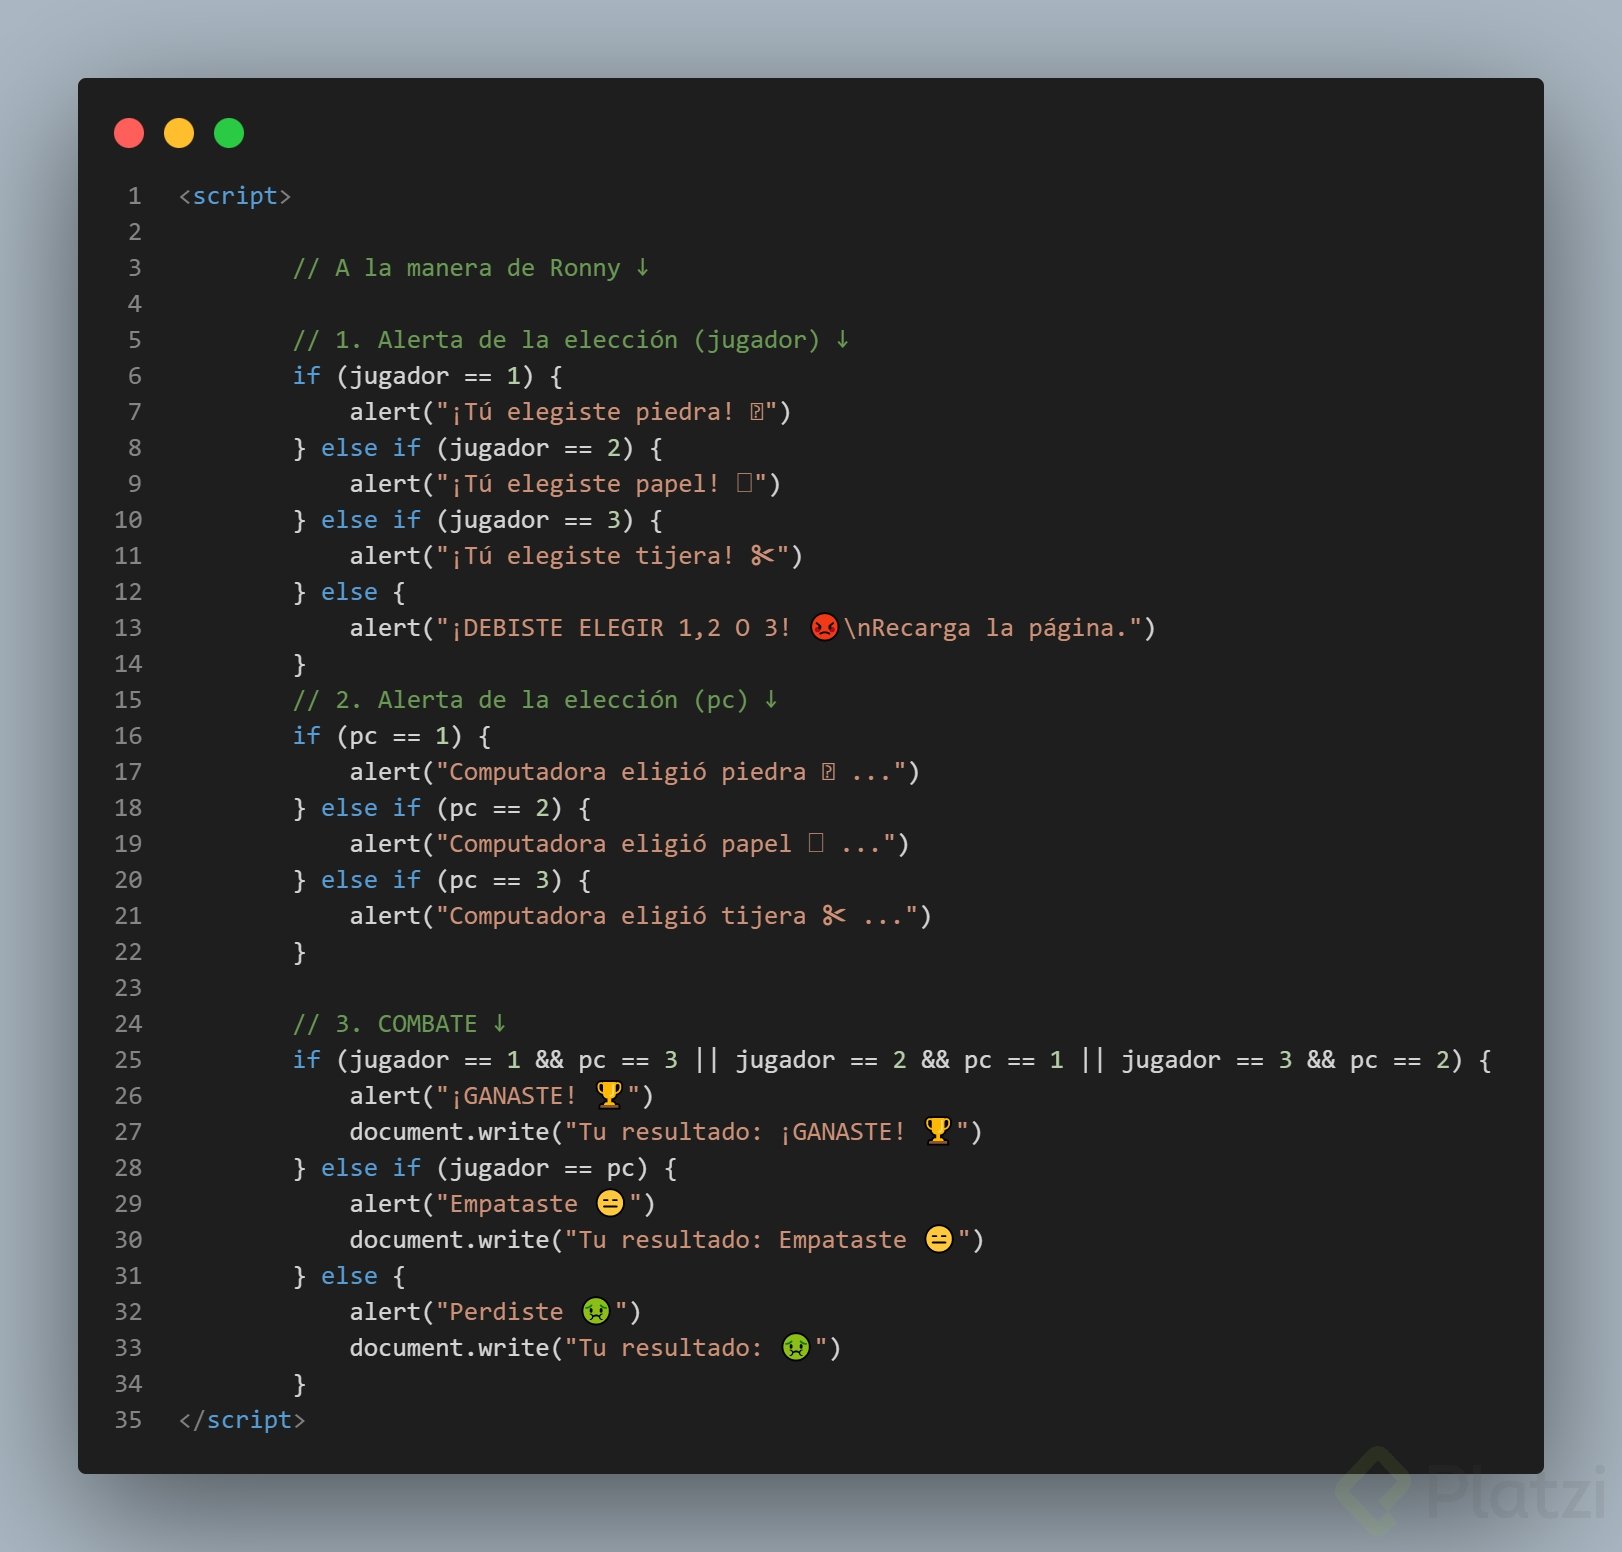 code-inspired-by-ronny.png